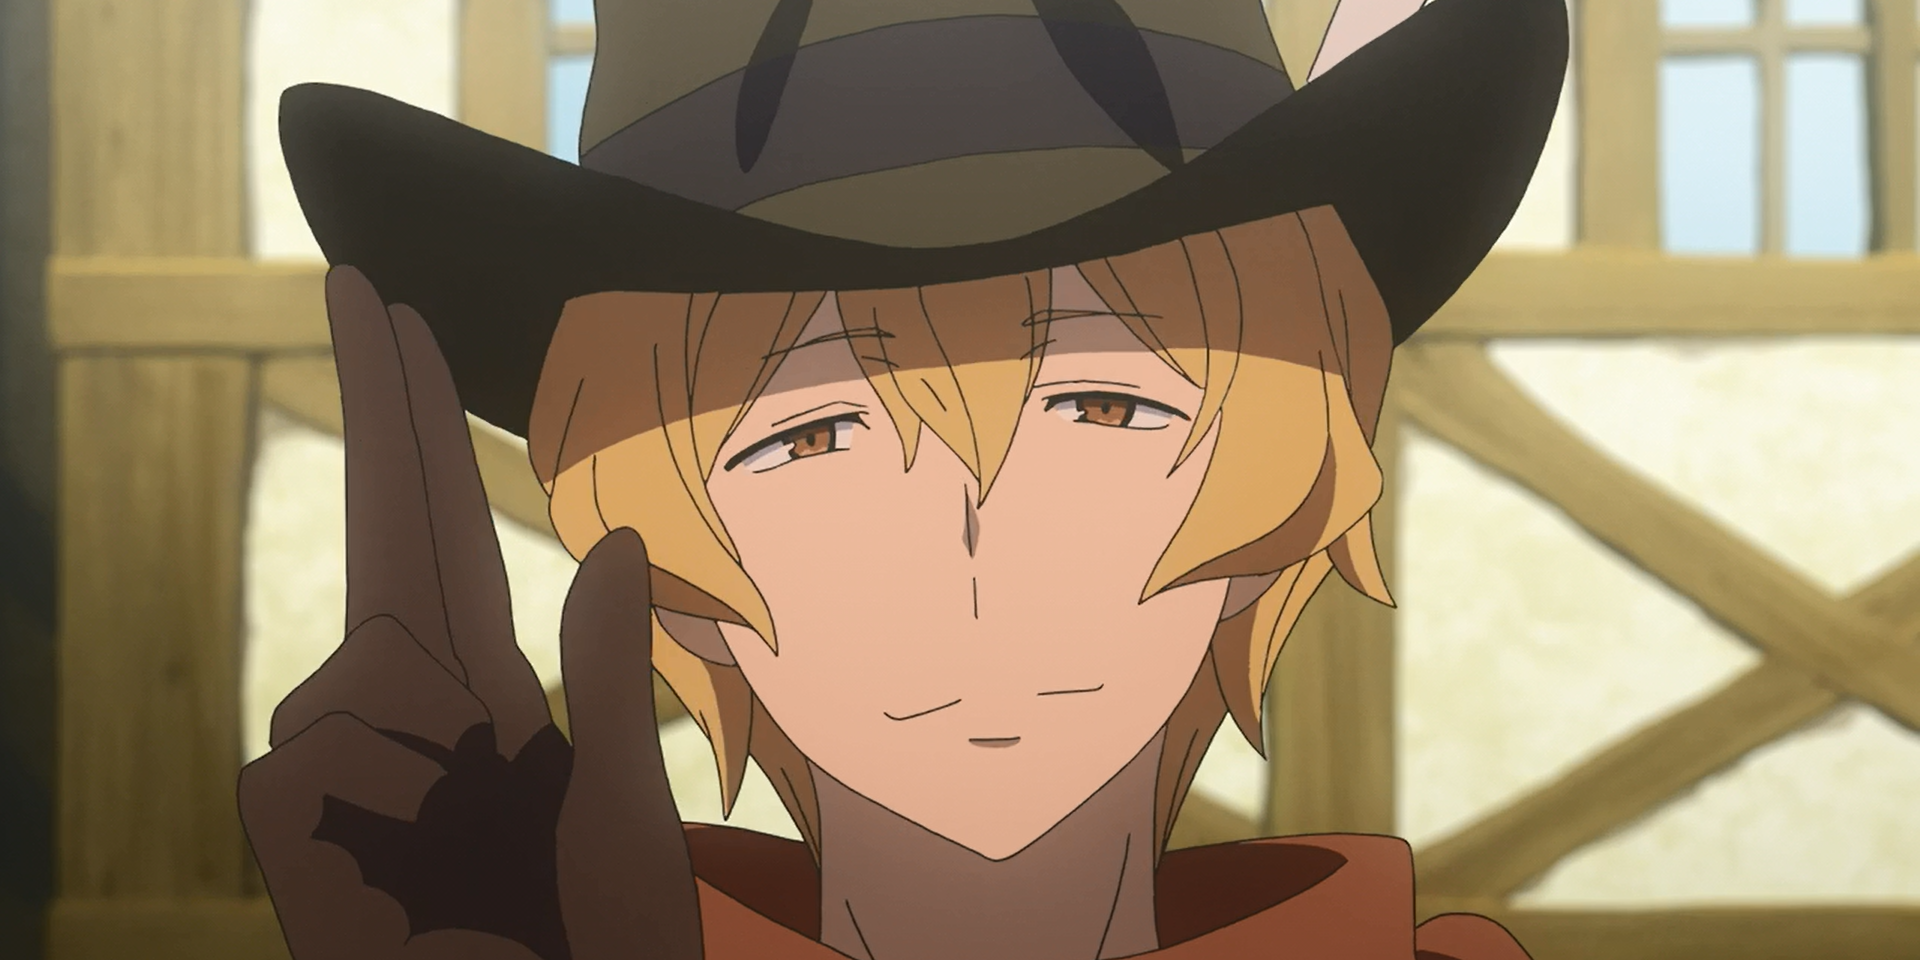 Hermes smiling in is it wrong to try to pick up girls in a dungeon